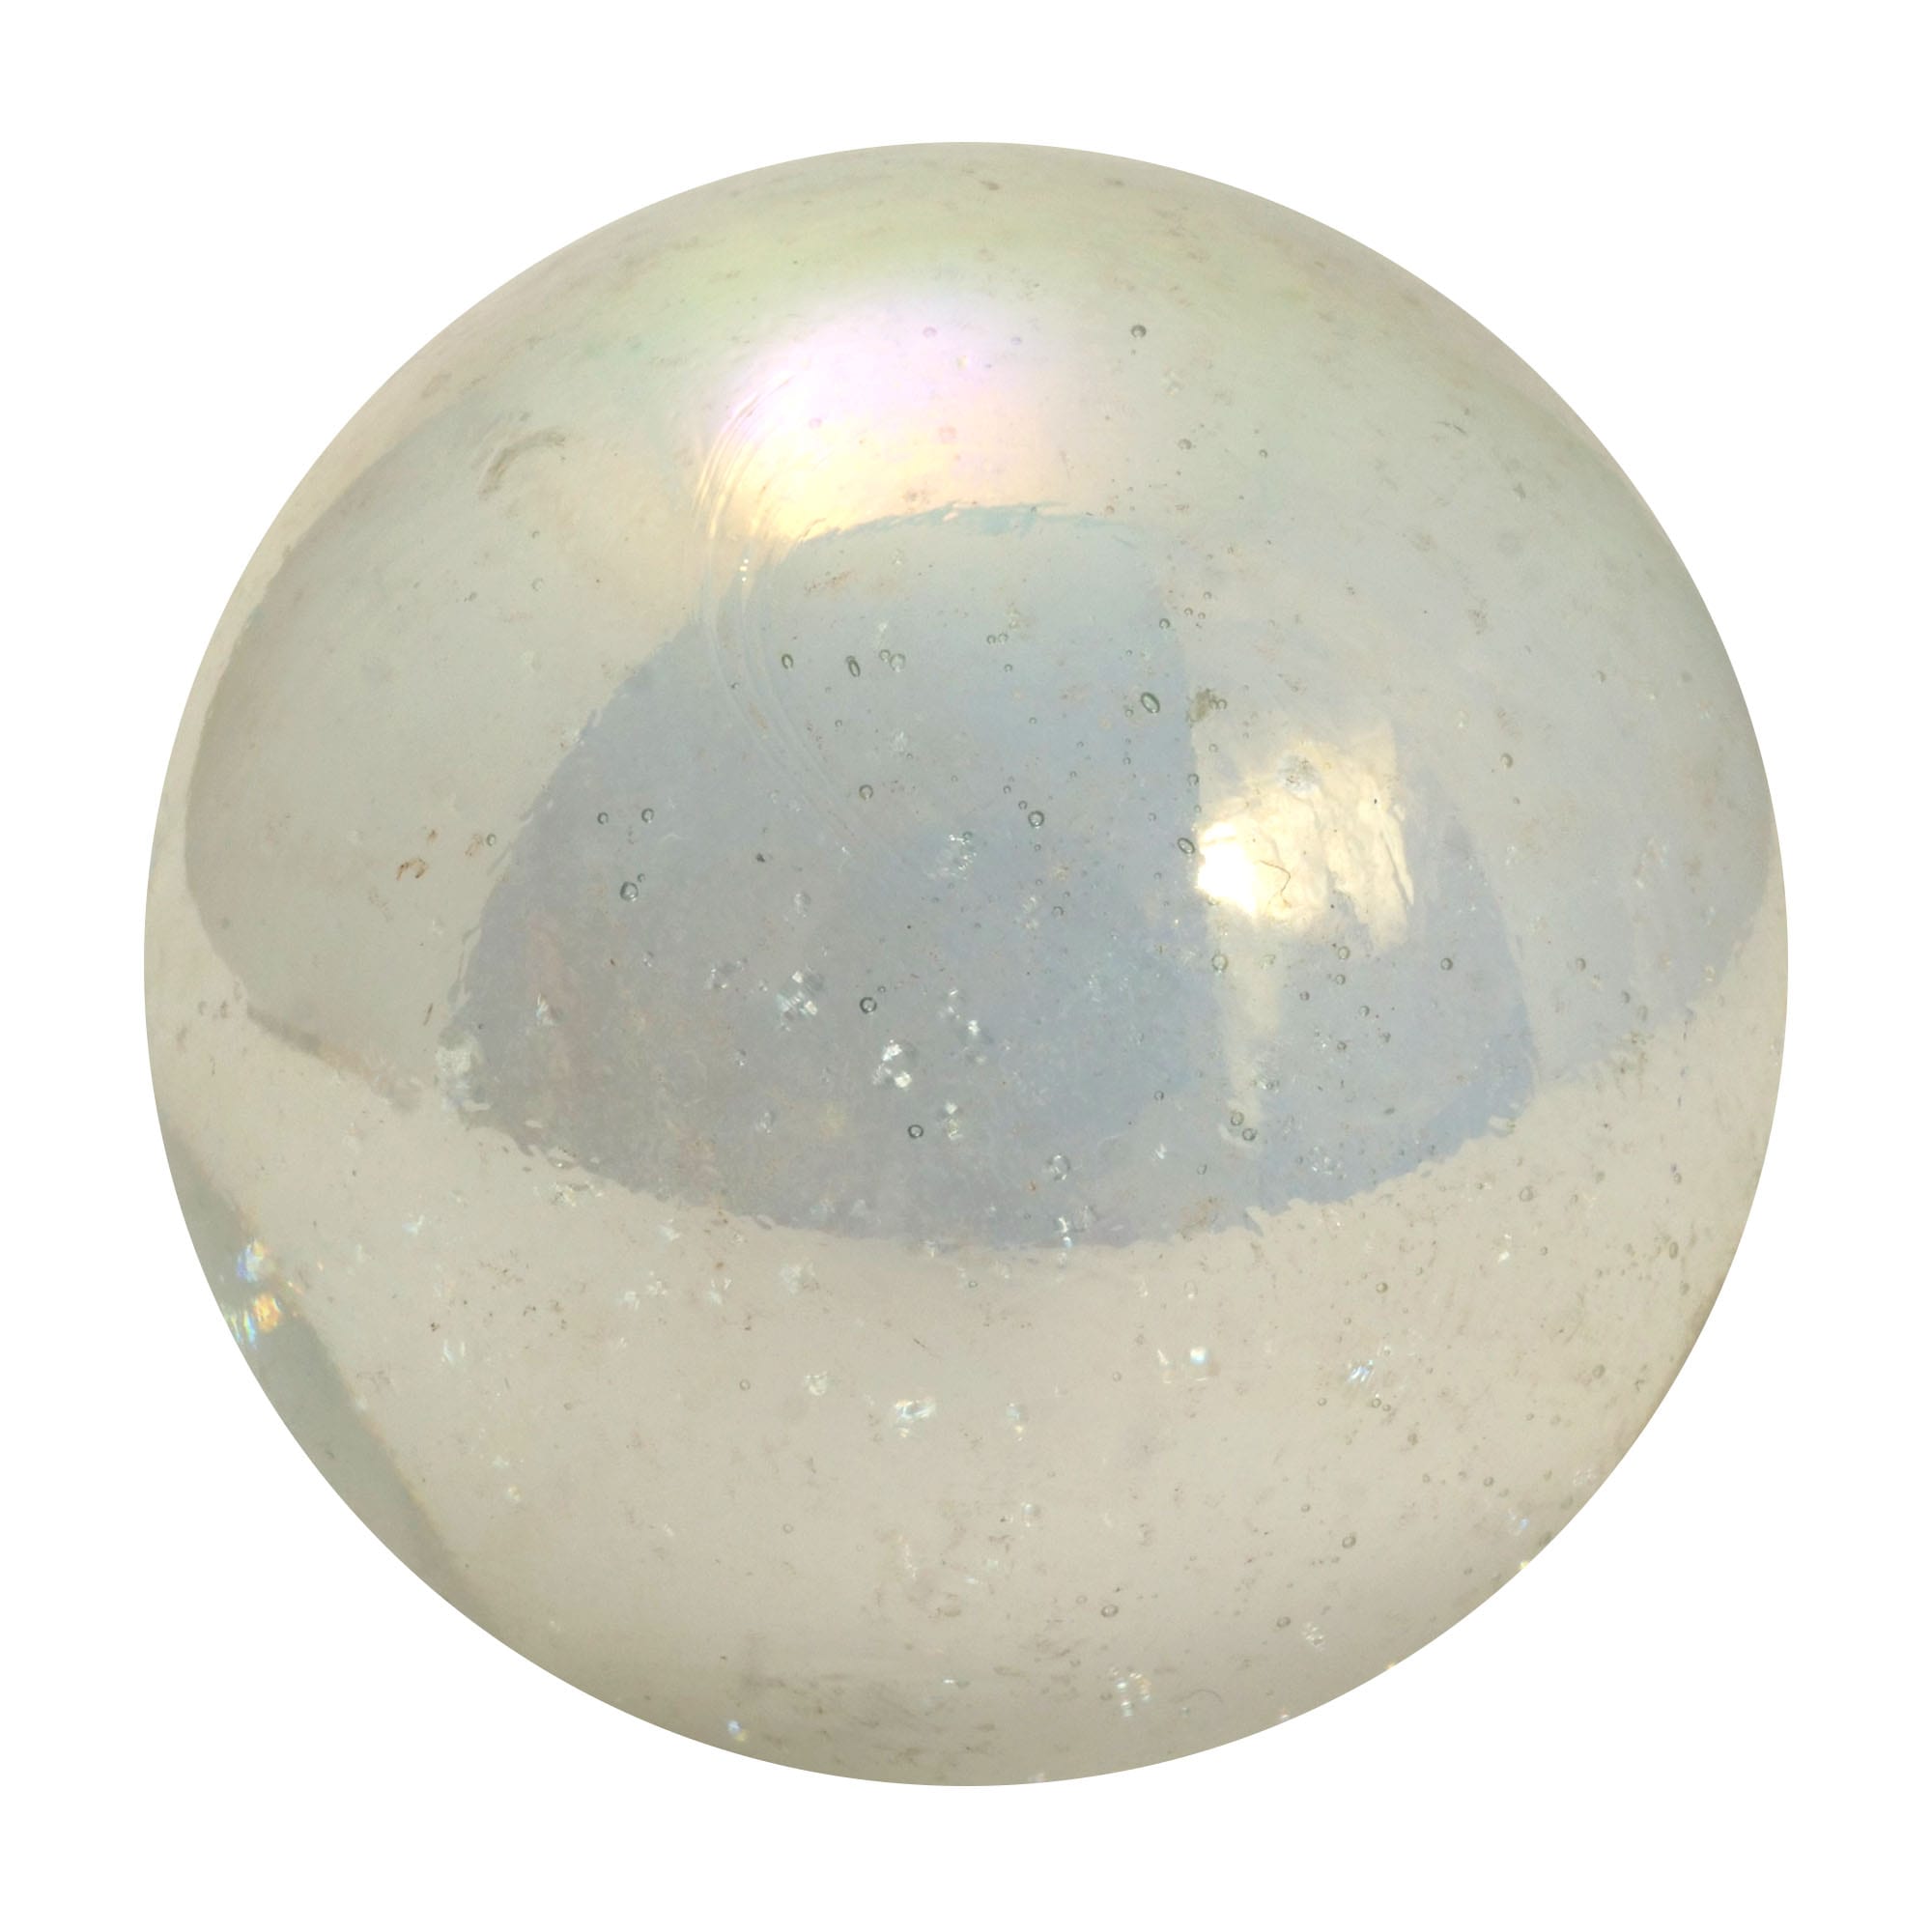 2 BOULDER 1 3/8 INCH 35MM SOAP BUBBLE BY VACOR MARBLES FREE SHIPPING 